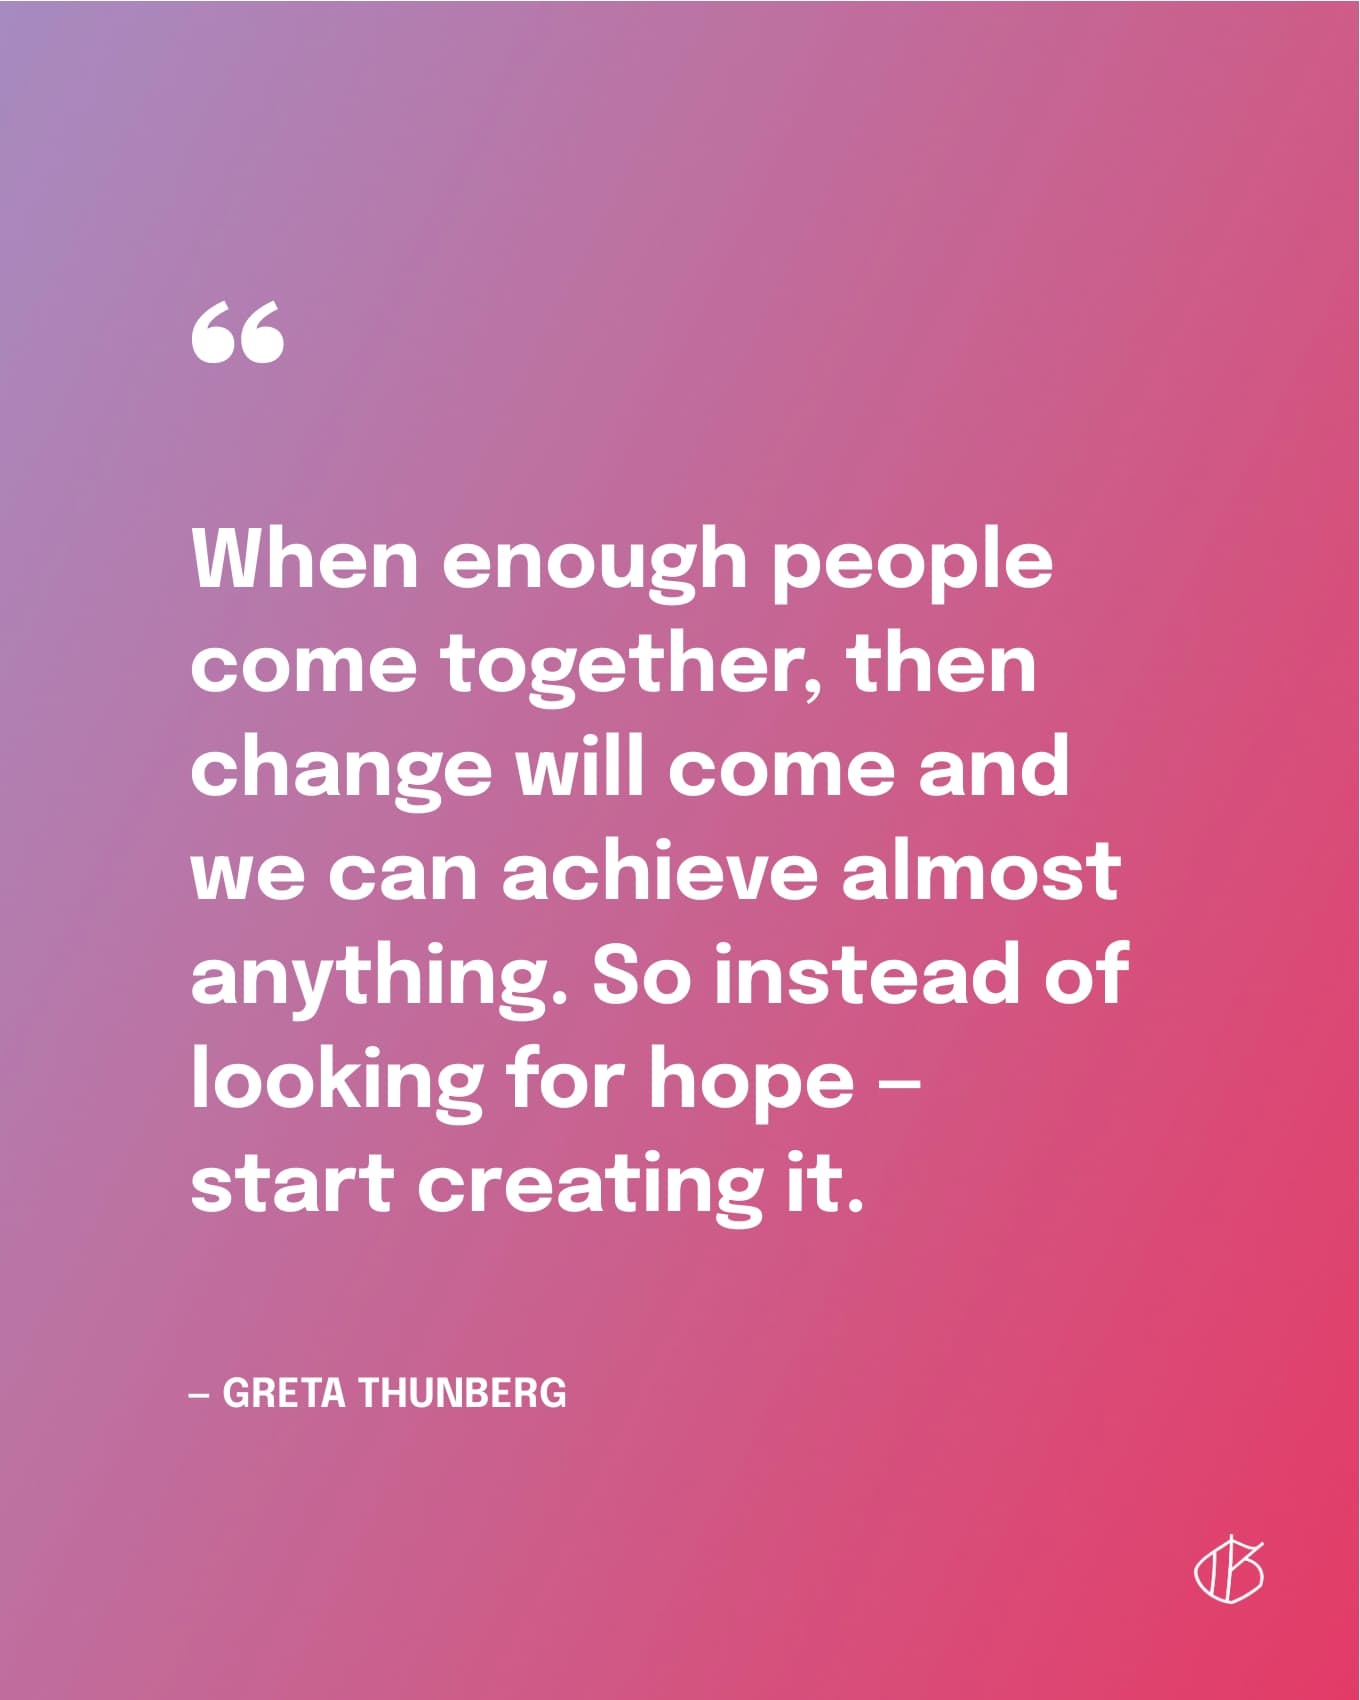 “When enough people come together, then change will come and we can achieve almost anything. So instead of looking for hope — start creating it.” — Greta Thunberg